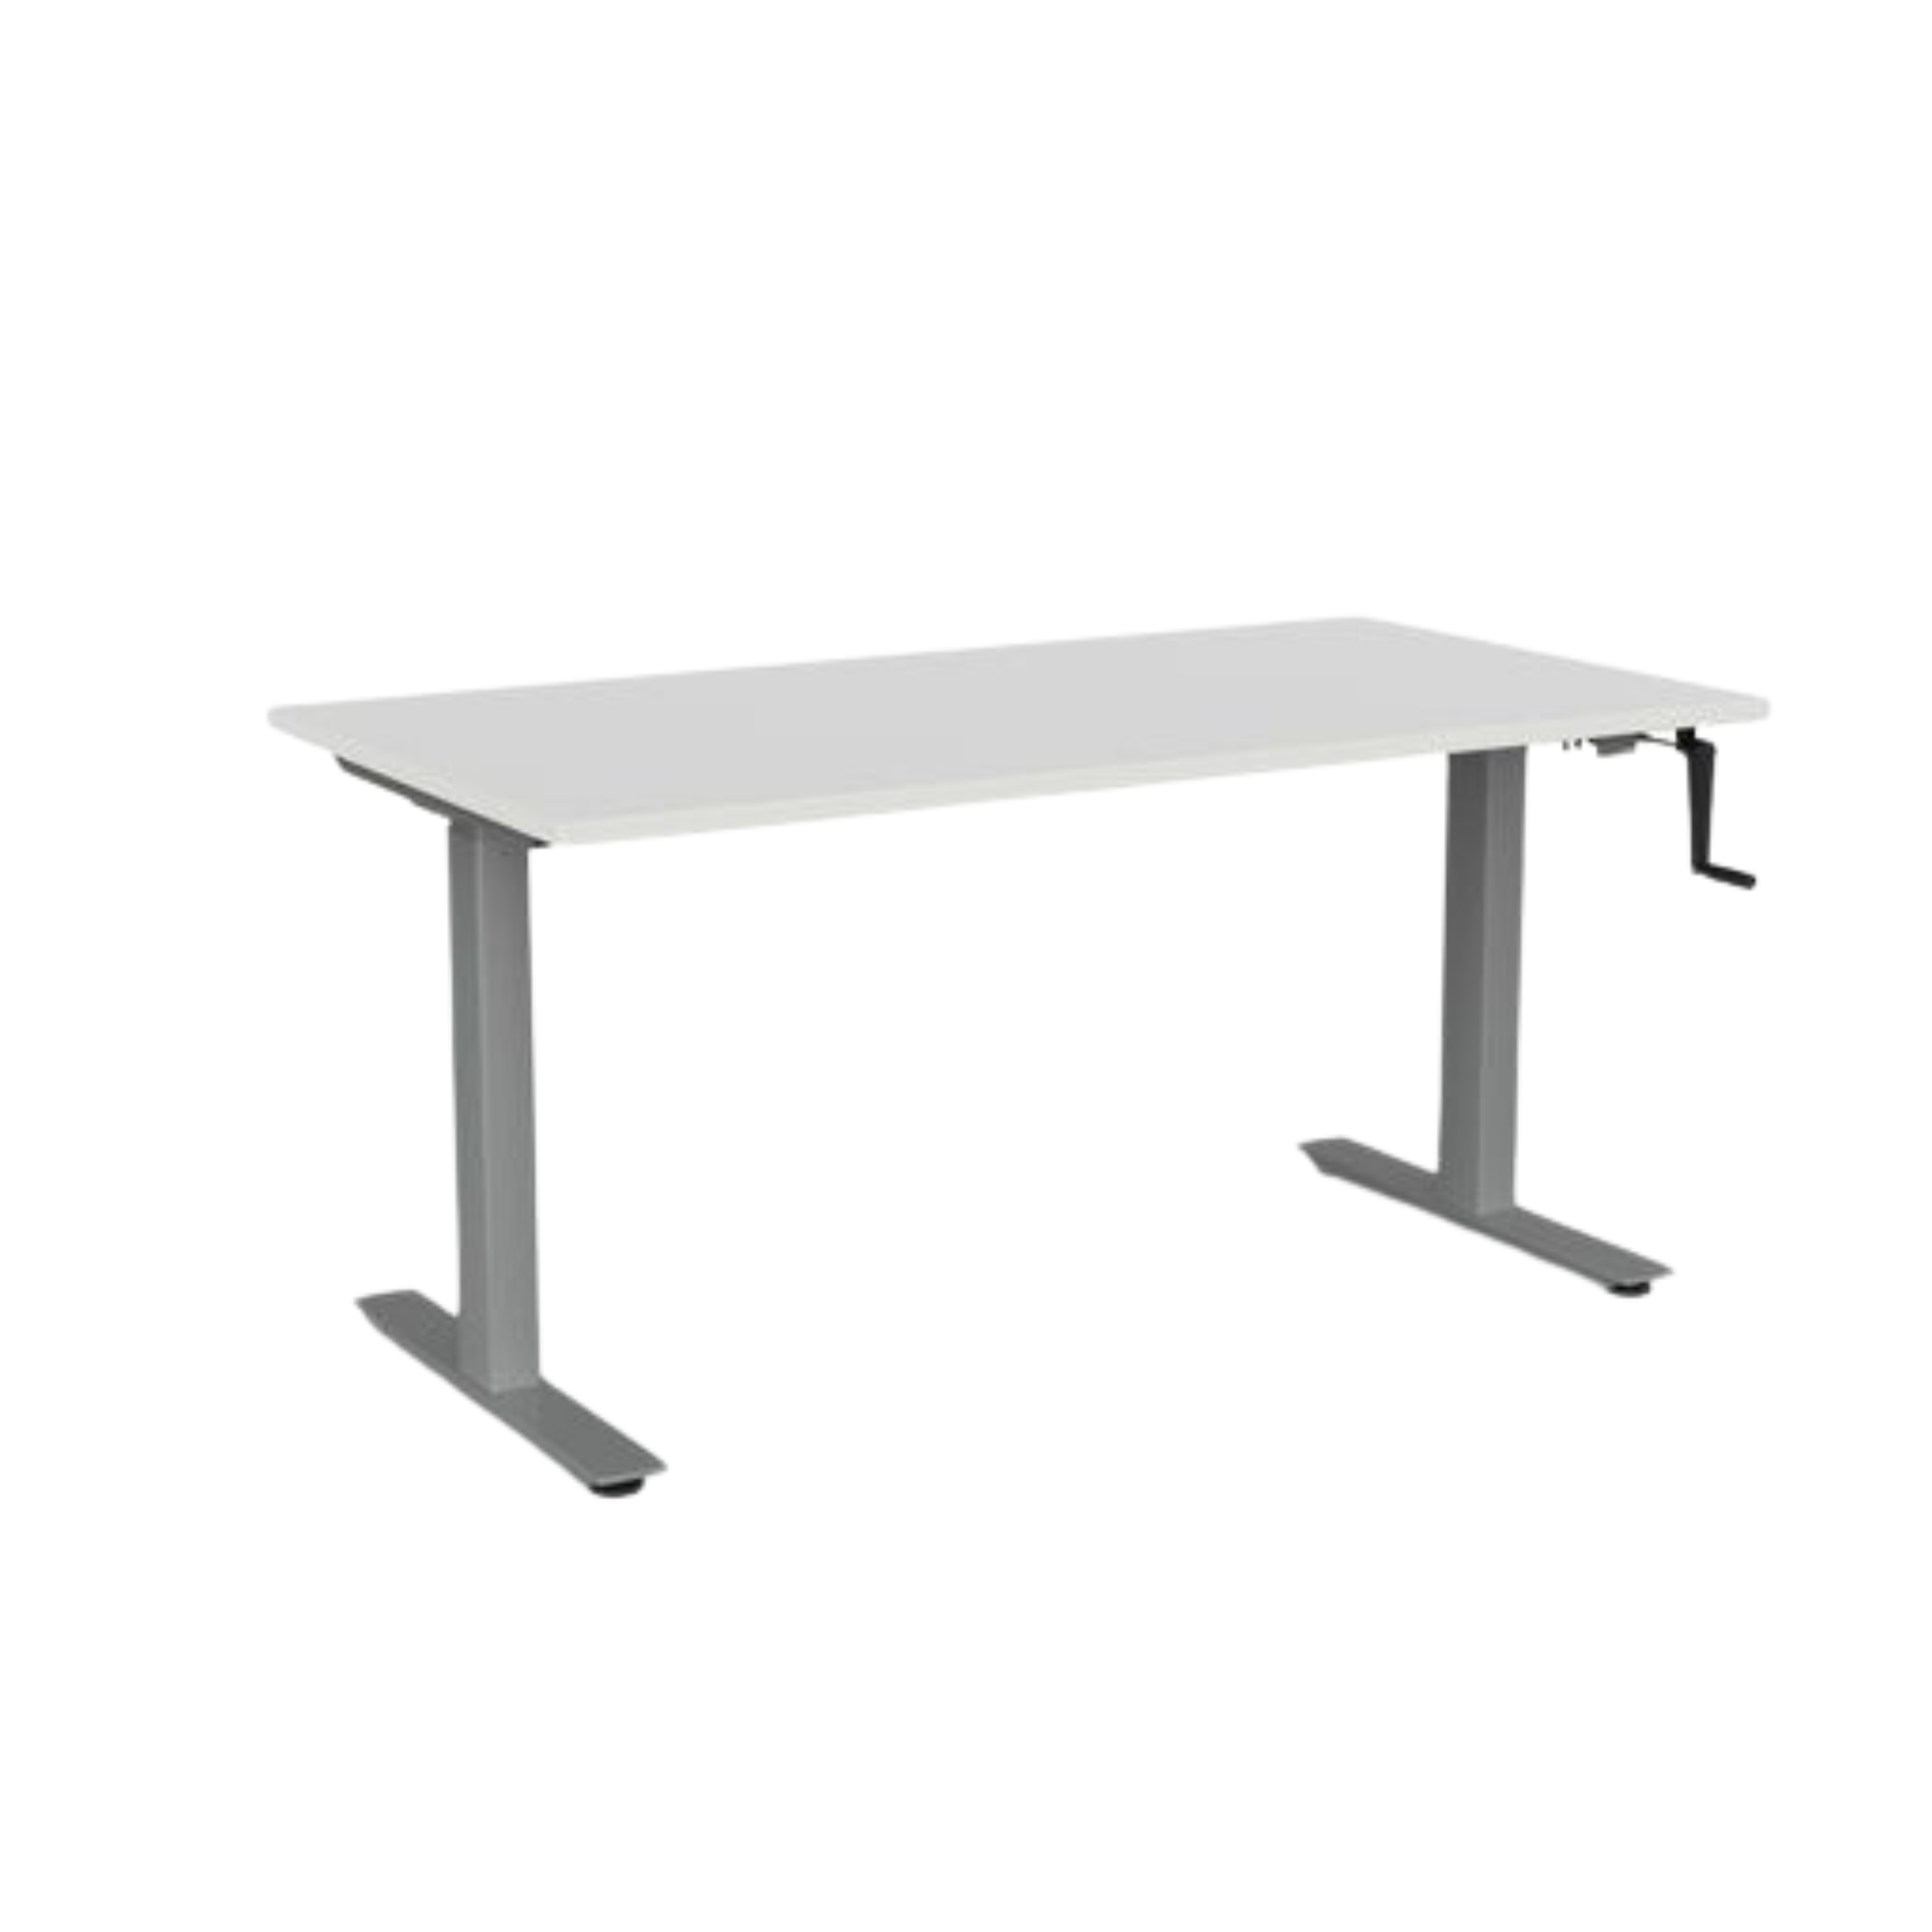 Agile winder sit to stand desk with silver frame and white top